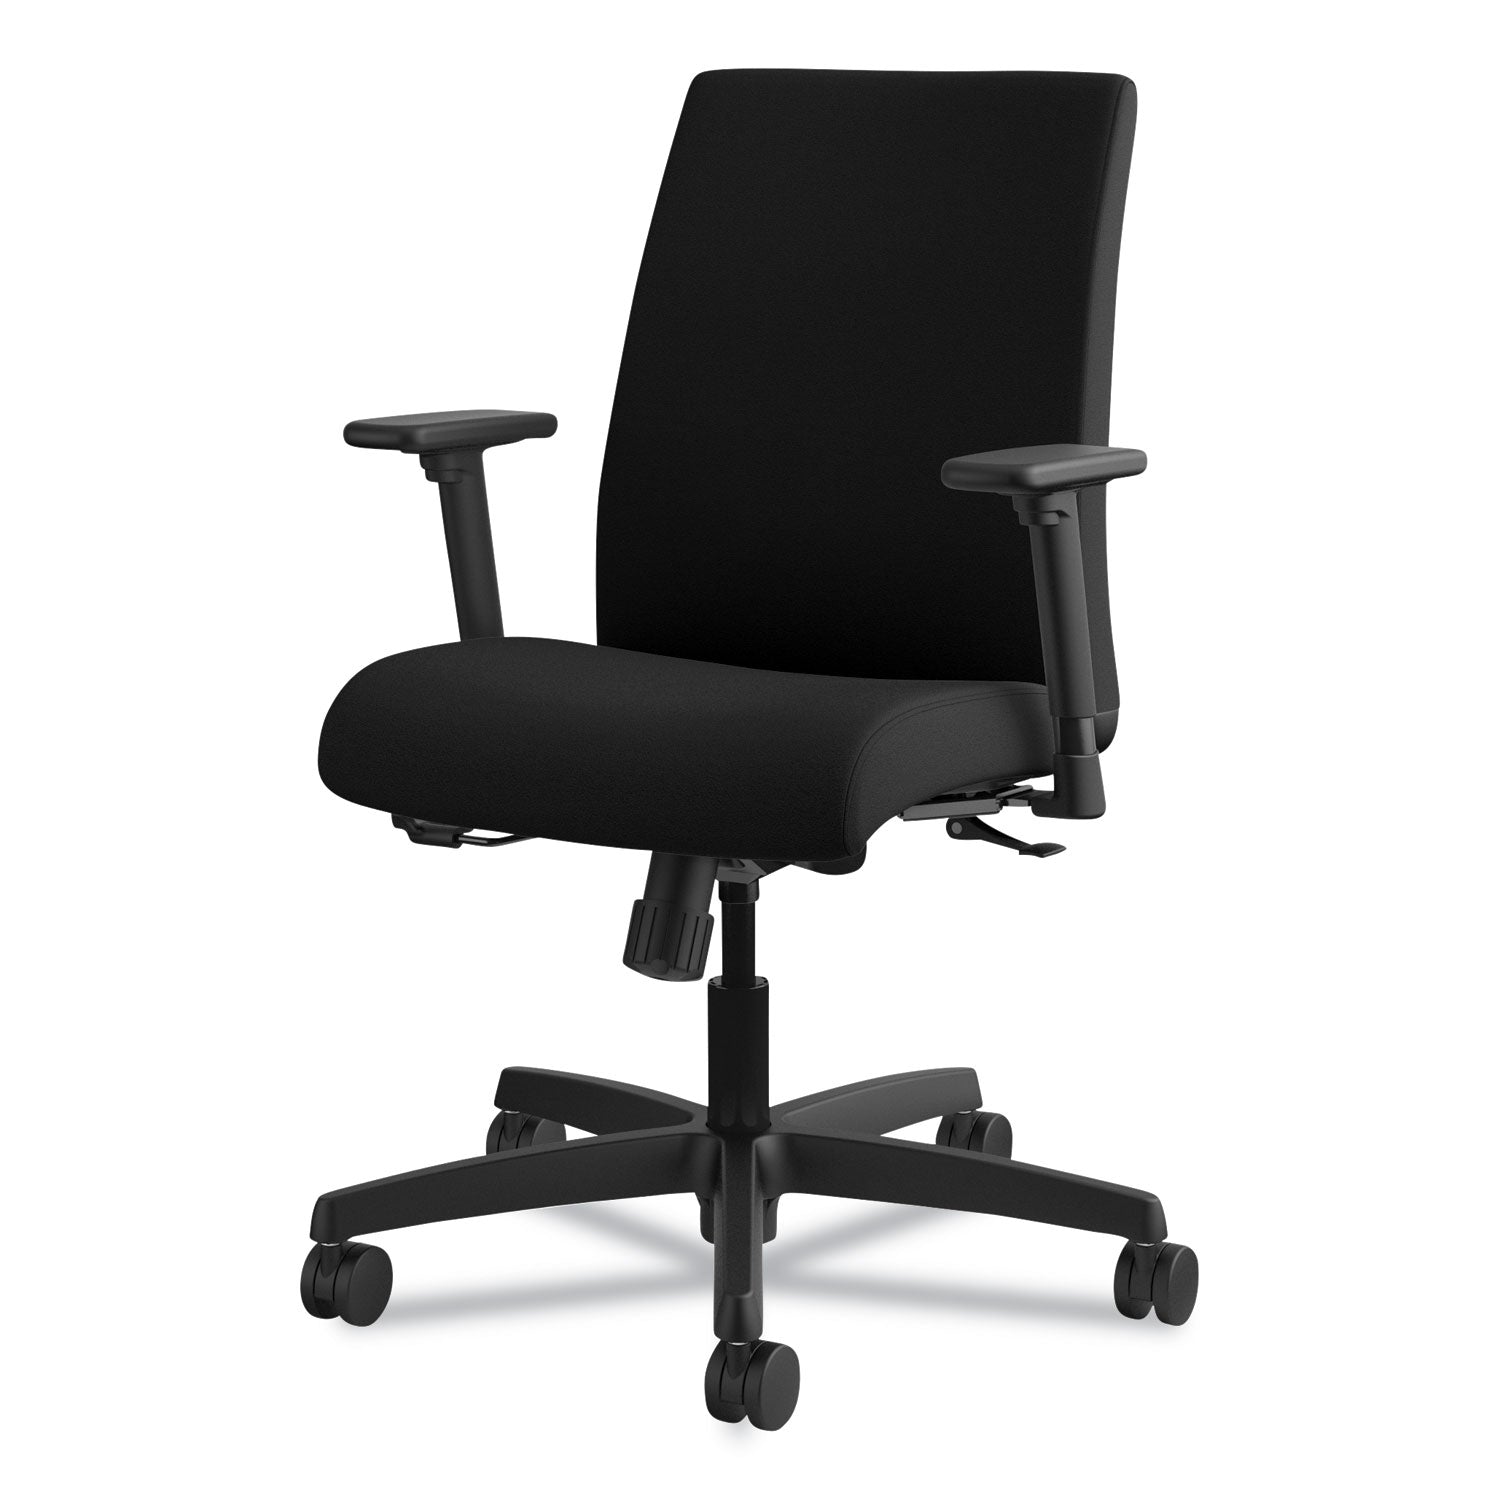 ignition-series-fabric-low-back-task-chair-supports-up-to-300-lb-17-to-215-seat-height-black_honit105cu10 - 3